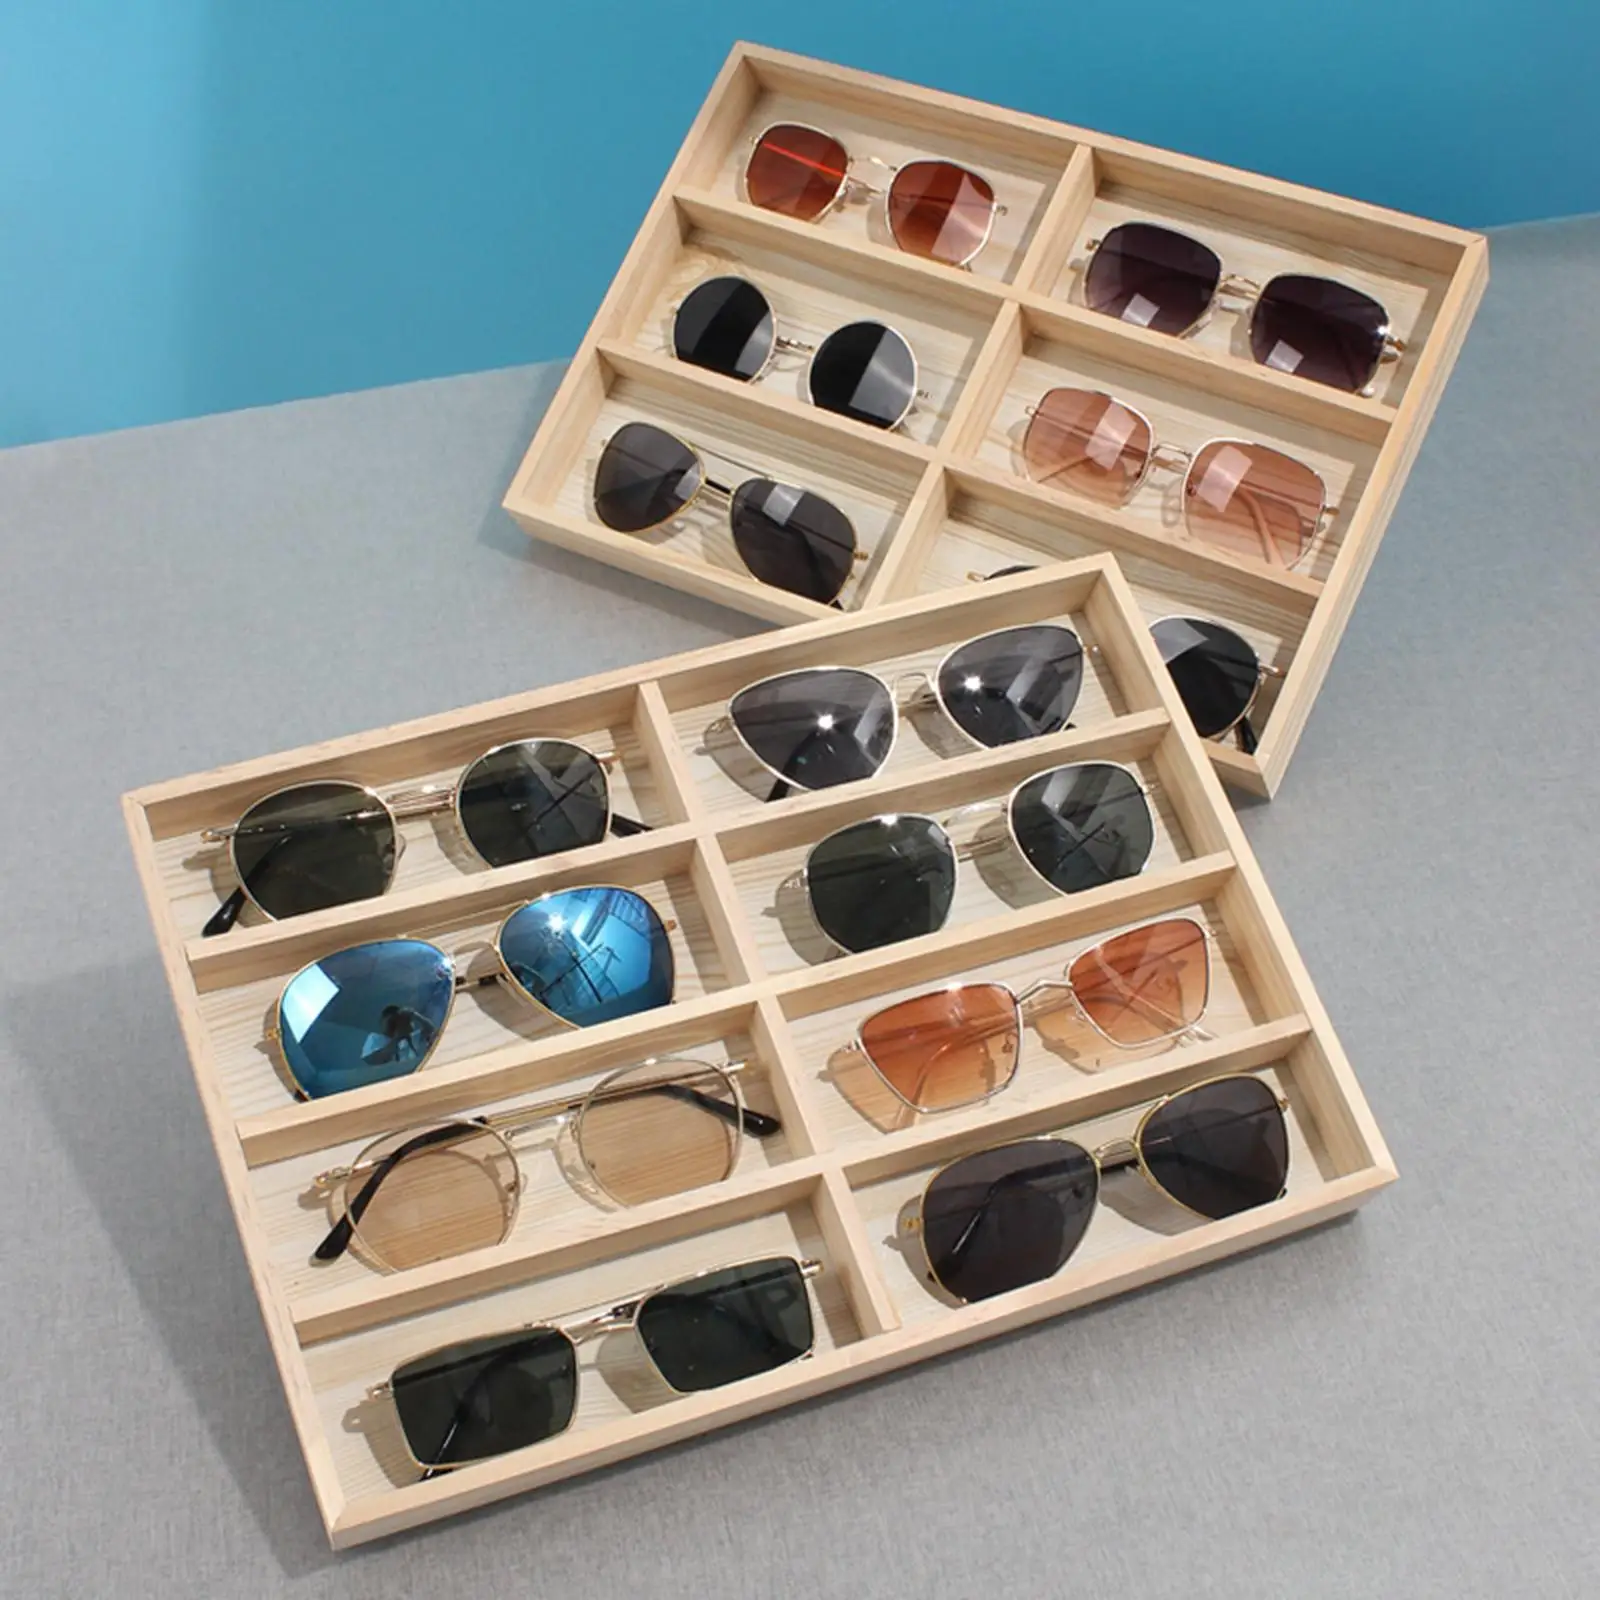 Glasses Organizer Storage Case Multifunctional Tabletop Holder for Jewelry